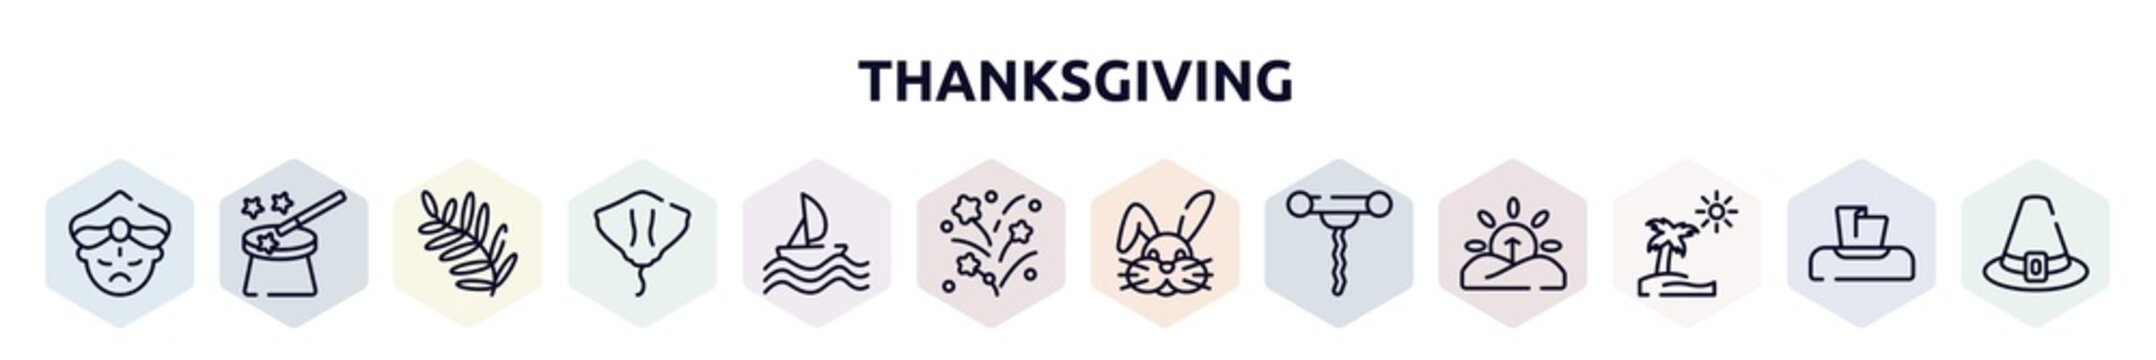 thanksgiving outline icons set. thin line icons such as maharaja, magic wand, fern, stingray, sailing, firework, bunny, corkscrew, pictures icon.